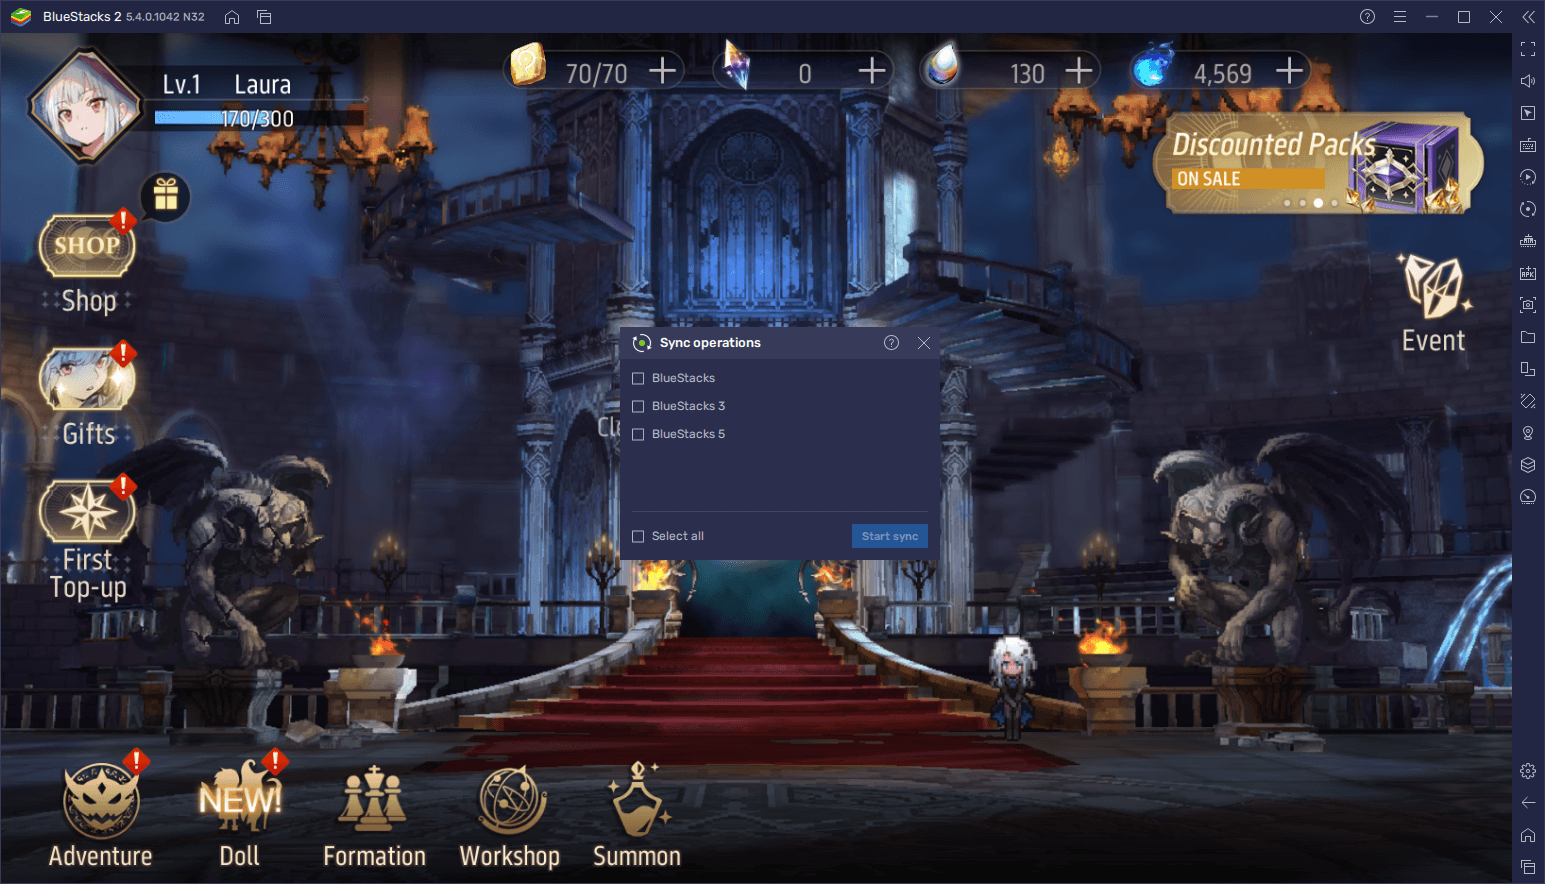 Revived Witch on PC - How to Get the Best Graphics, Performance, and Controls With BlueStacks